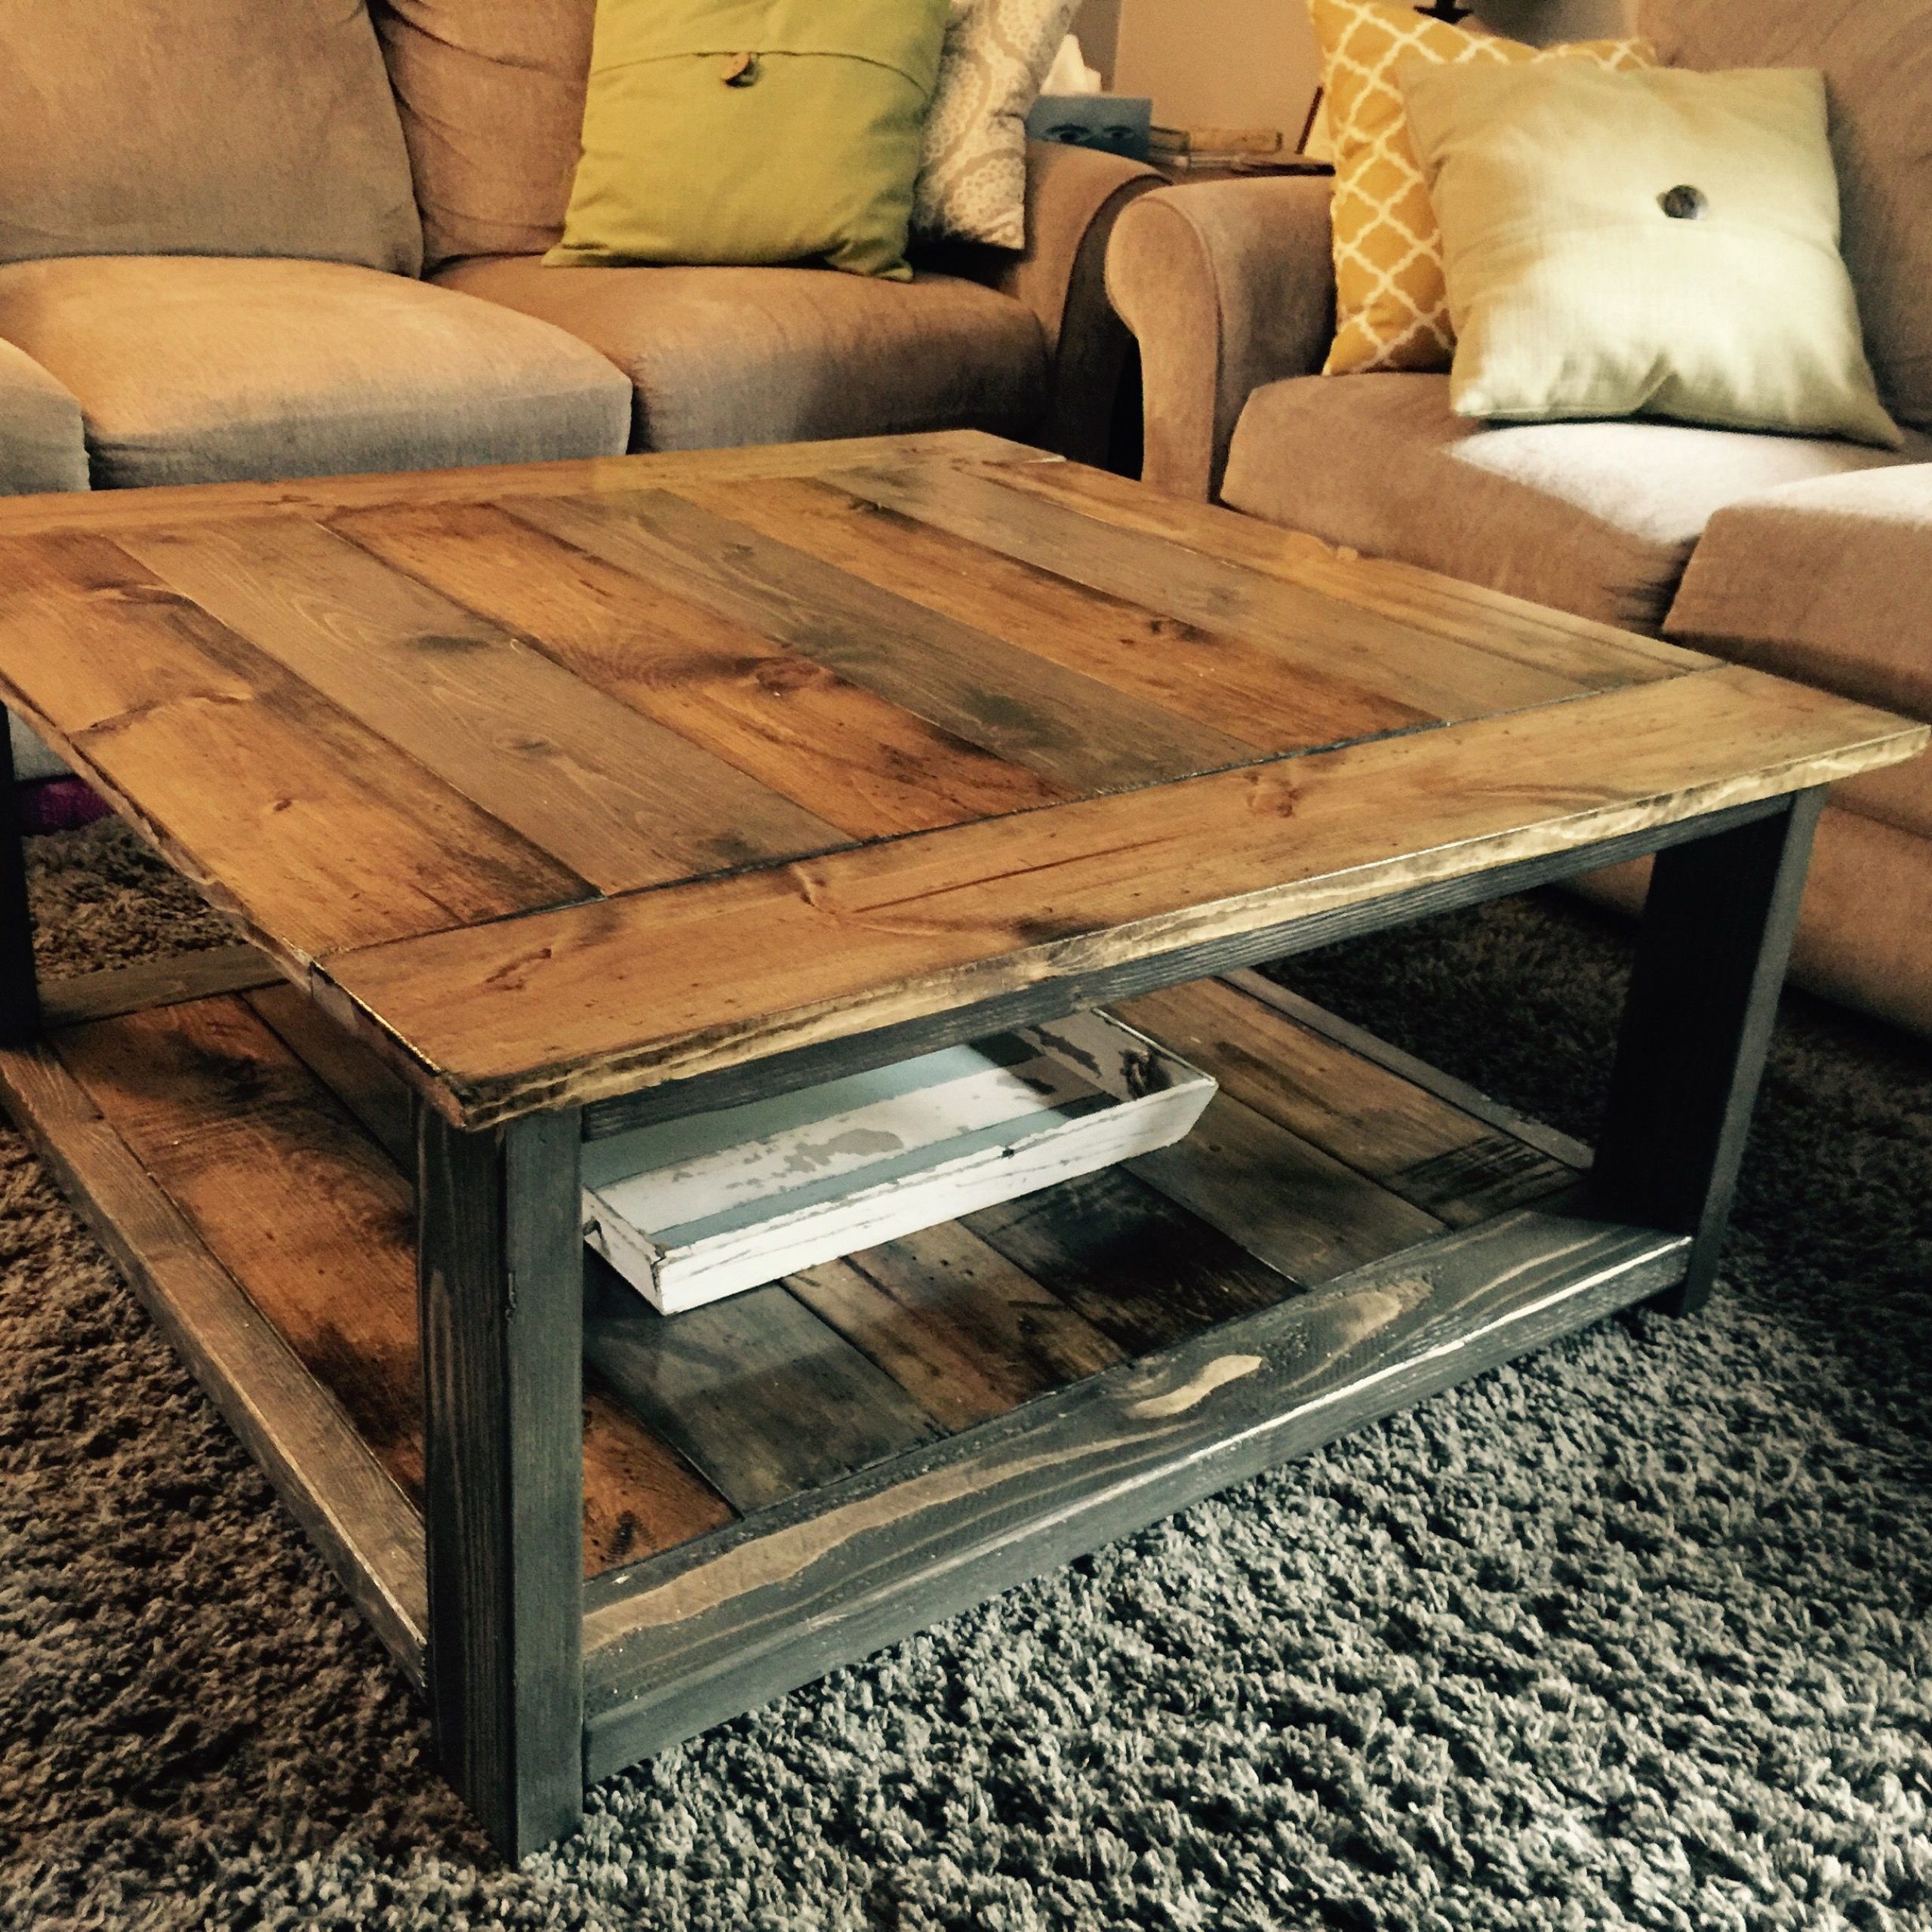 Rustic Xless Coffee Table | Do It Yourself Home Projects From Ana White Regarding Rustic Wood Coffee Tables (Gallery 9 of 20)